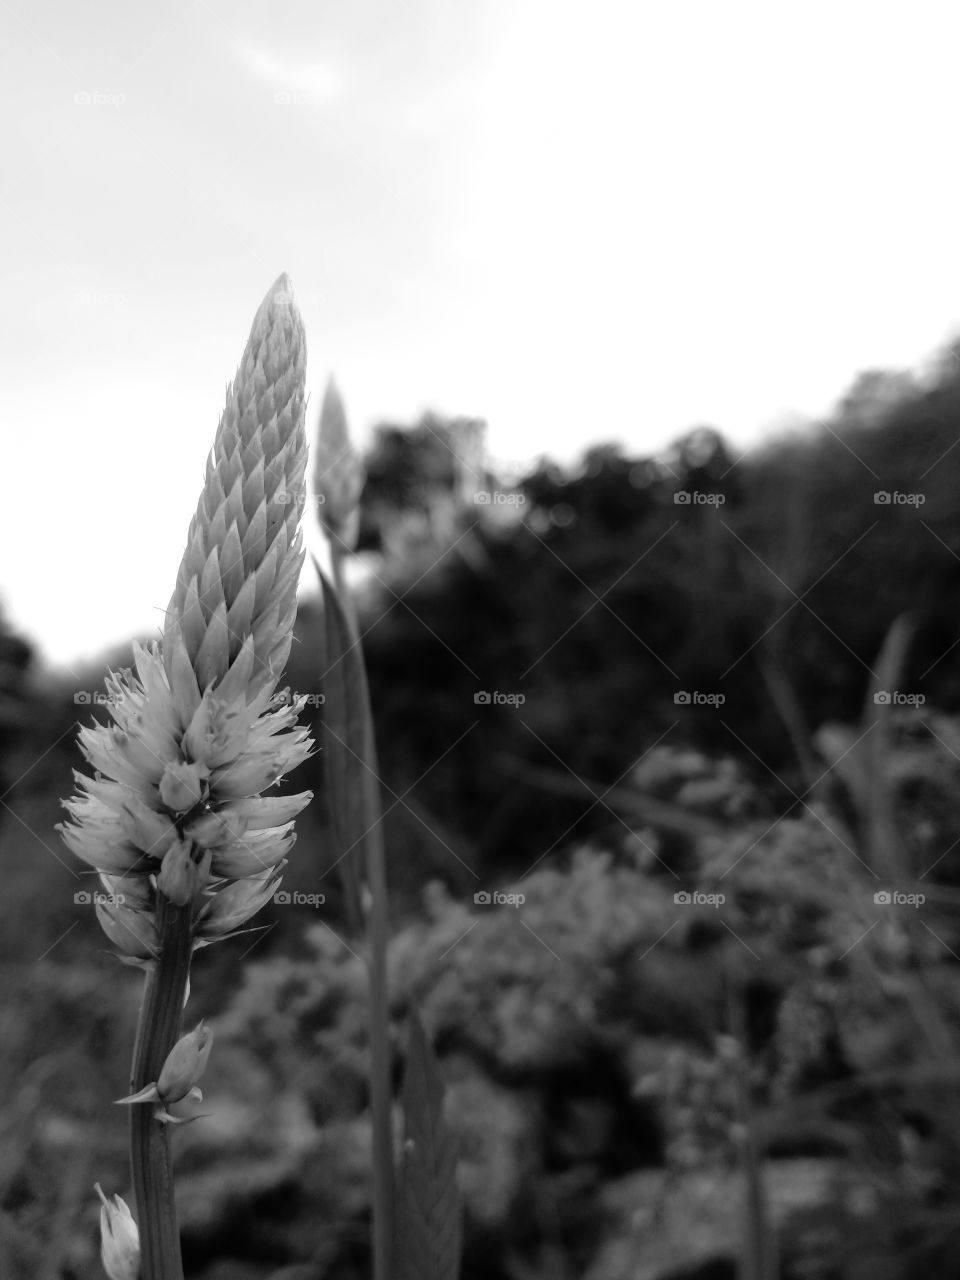 Wild grass; peacefully and silently growing along the pavement, trying to reach the sky
world in black and white